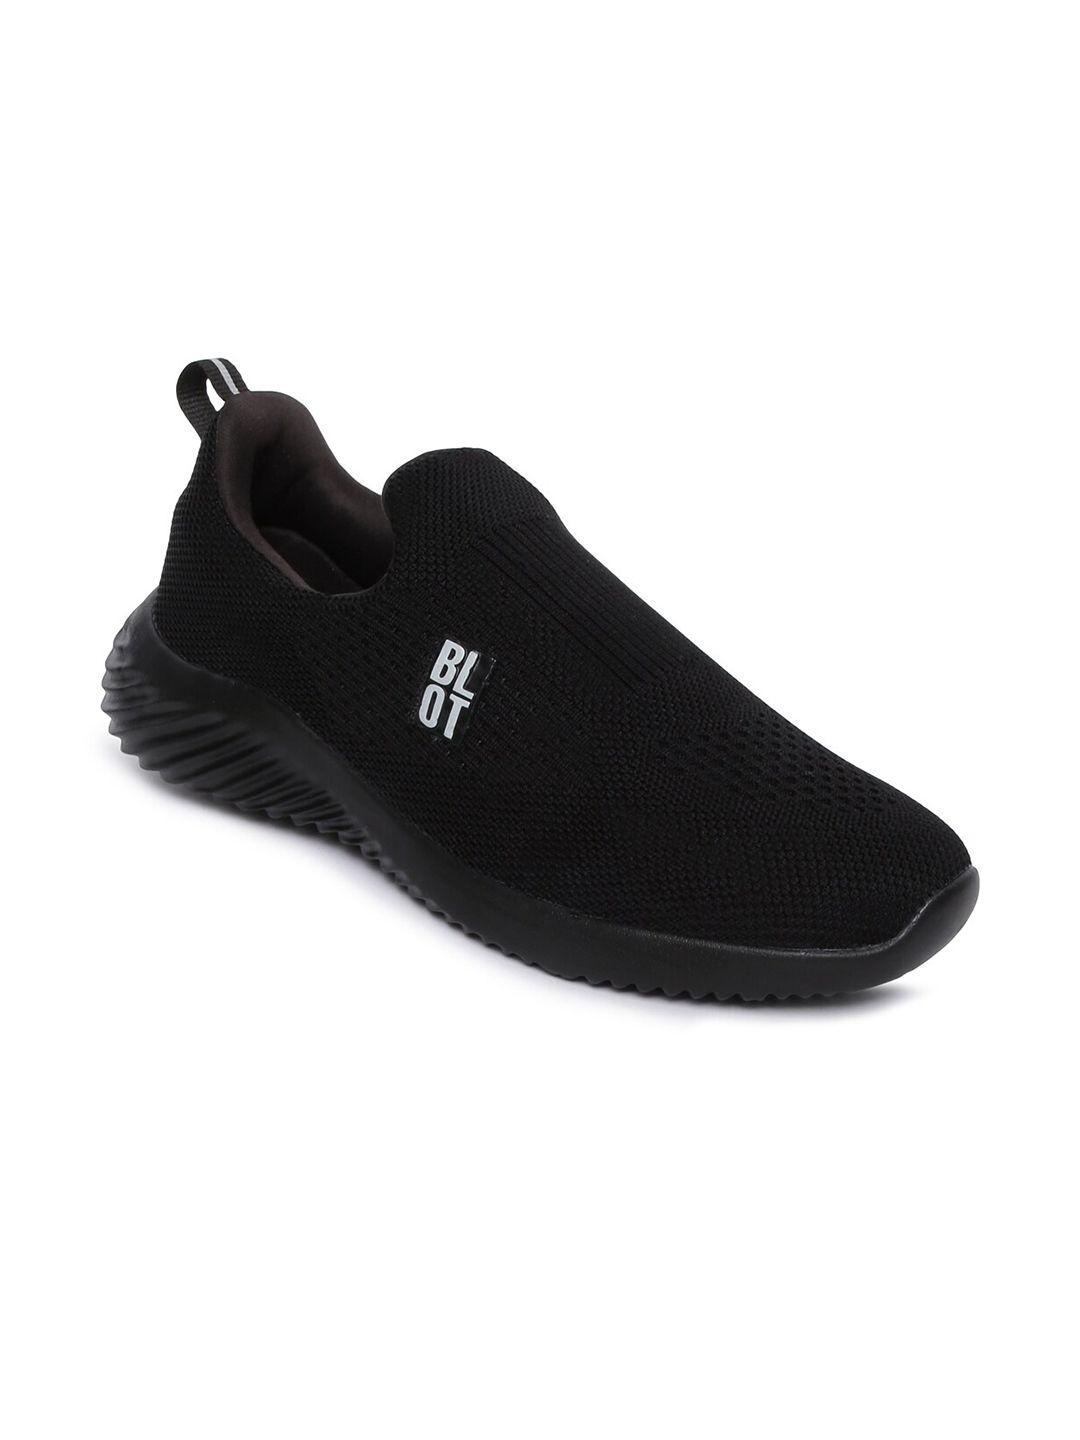 paragon-men-black-knitted-canvas-running-shoes